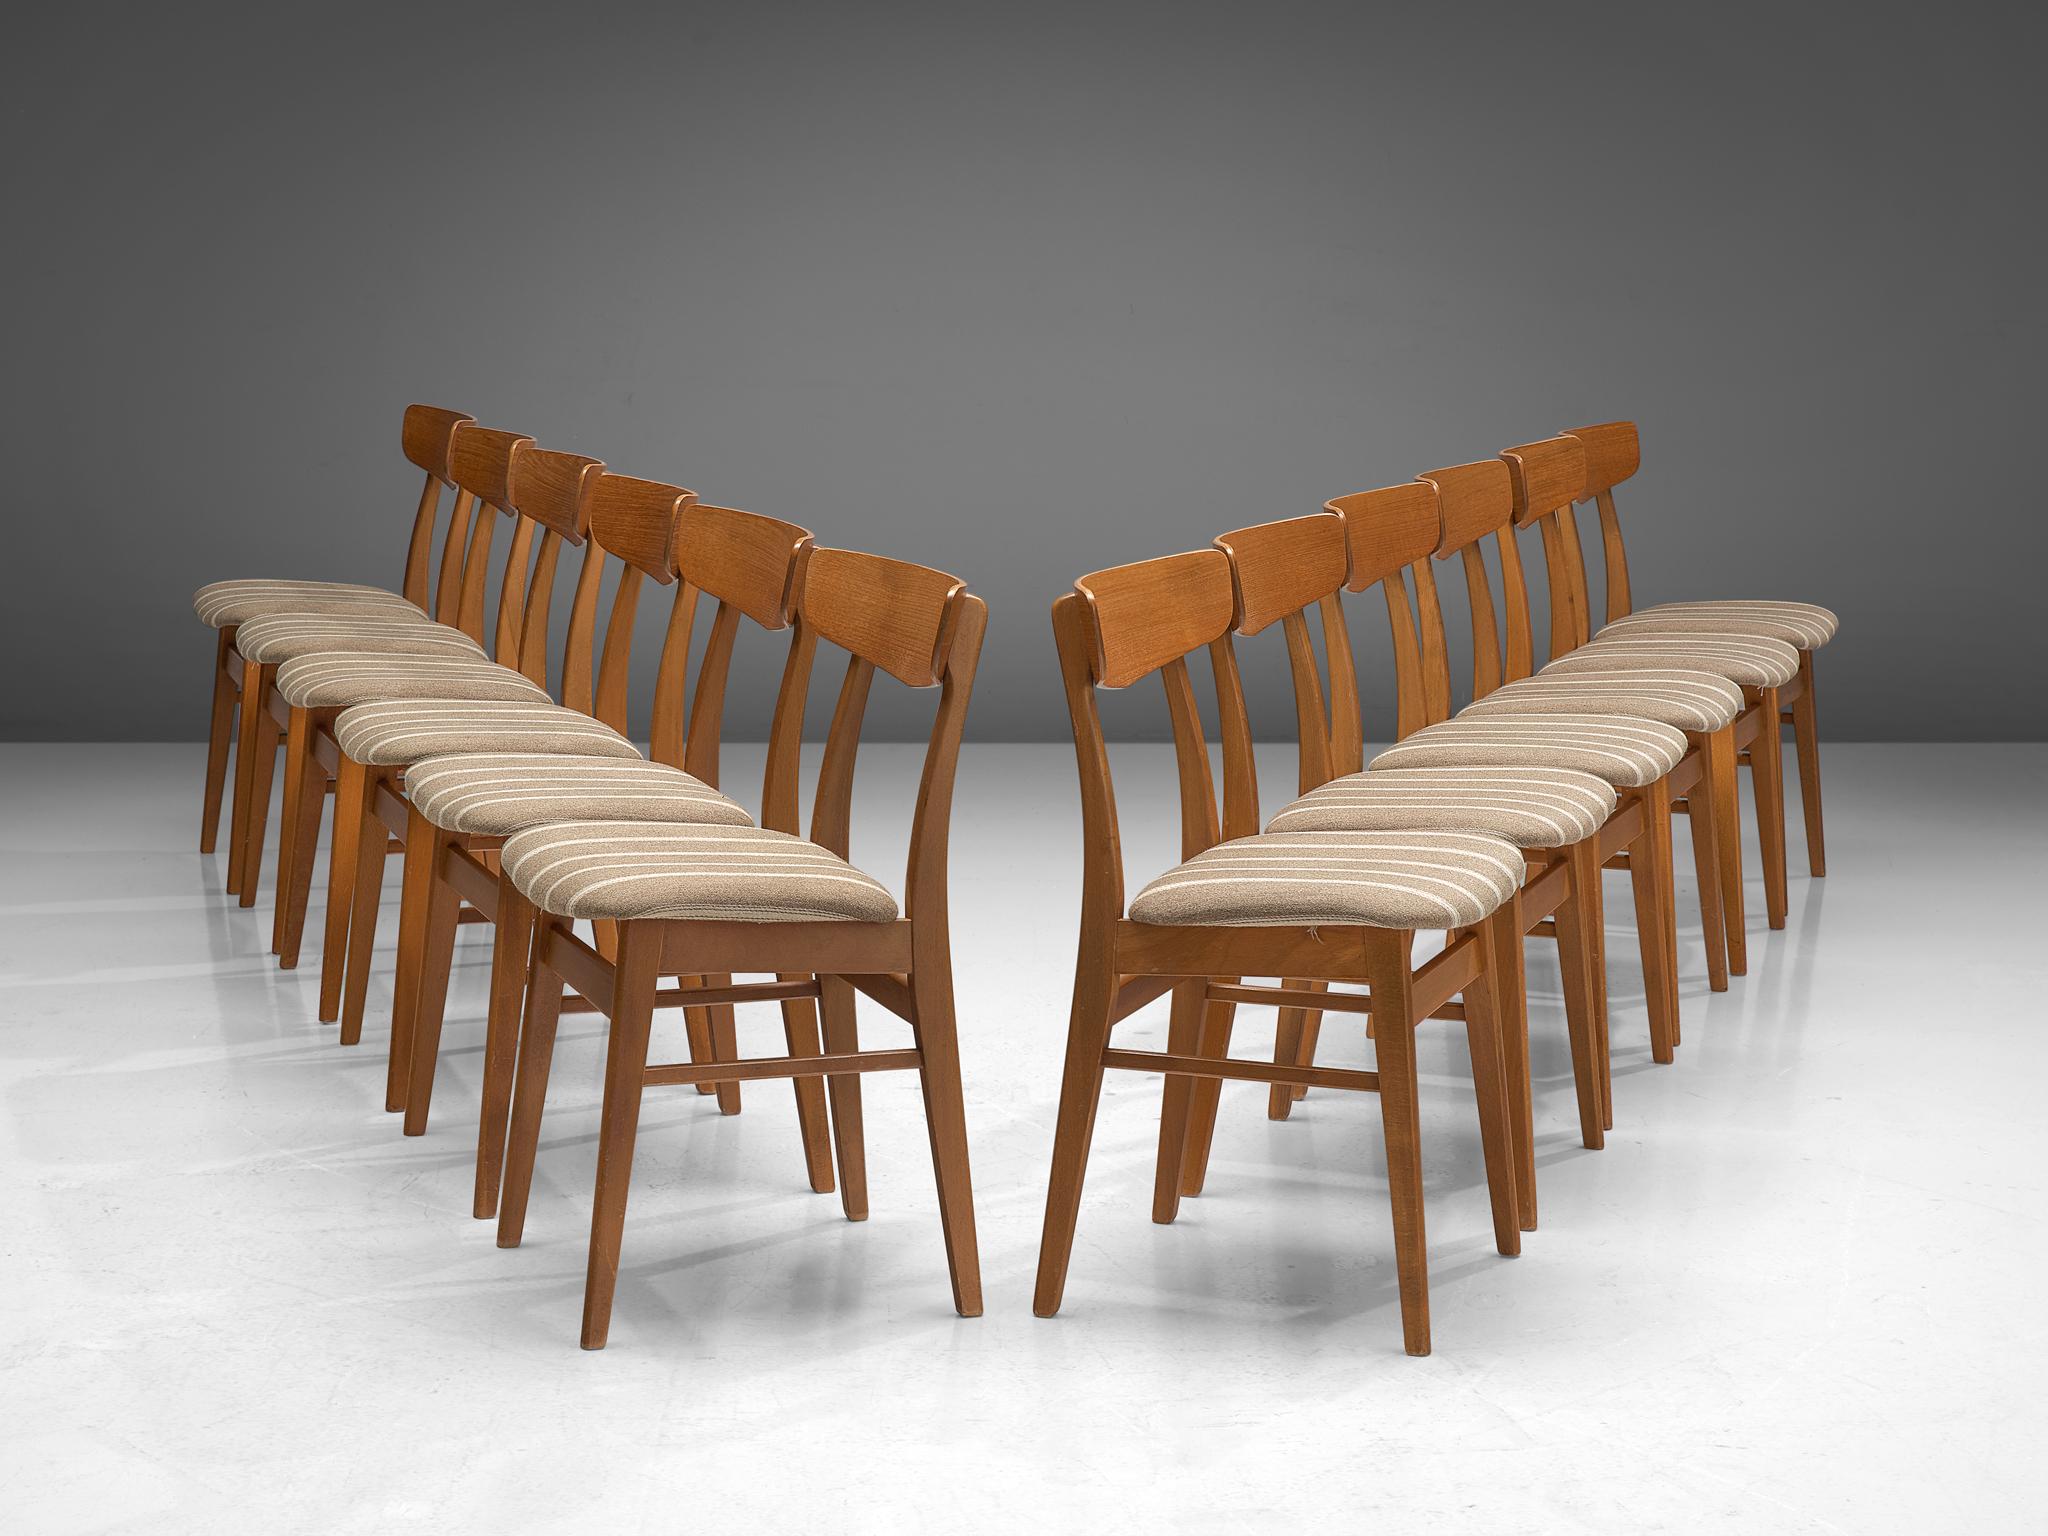 Set of twelve dining chairs in teak, Denmark, 1960s

These well made Danish dining chairs have a convincing appearance and a construction typical for Danish style furniture in the 1960s, showing resemblance to the work of Hans J. Wegner. The design